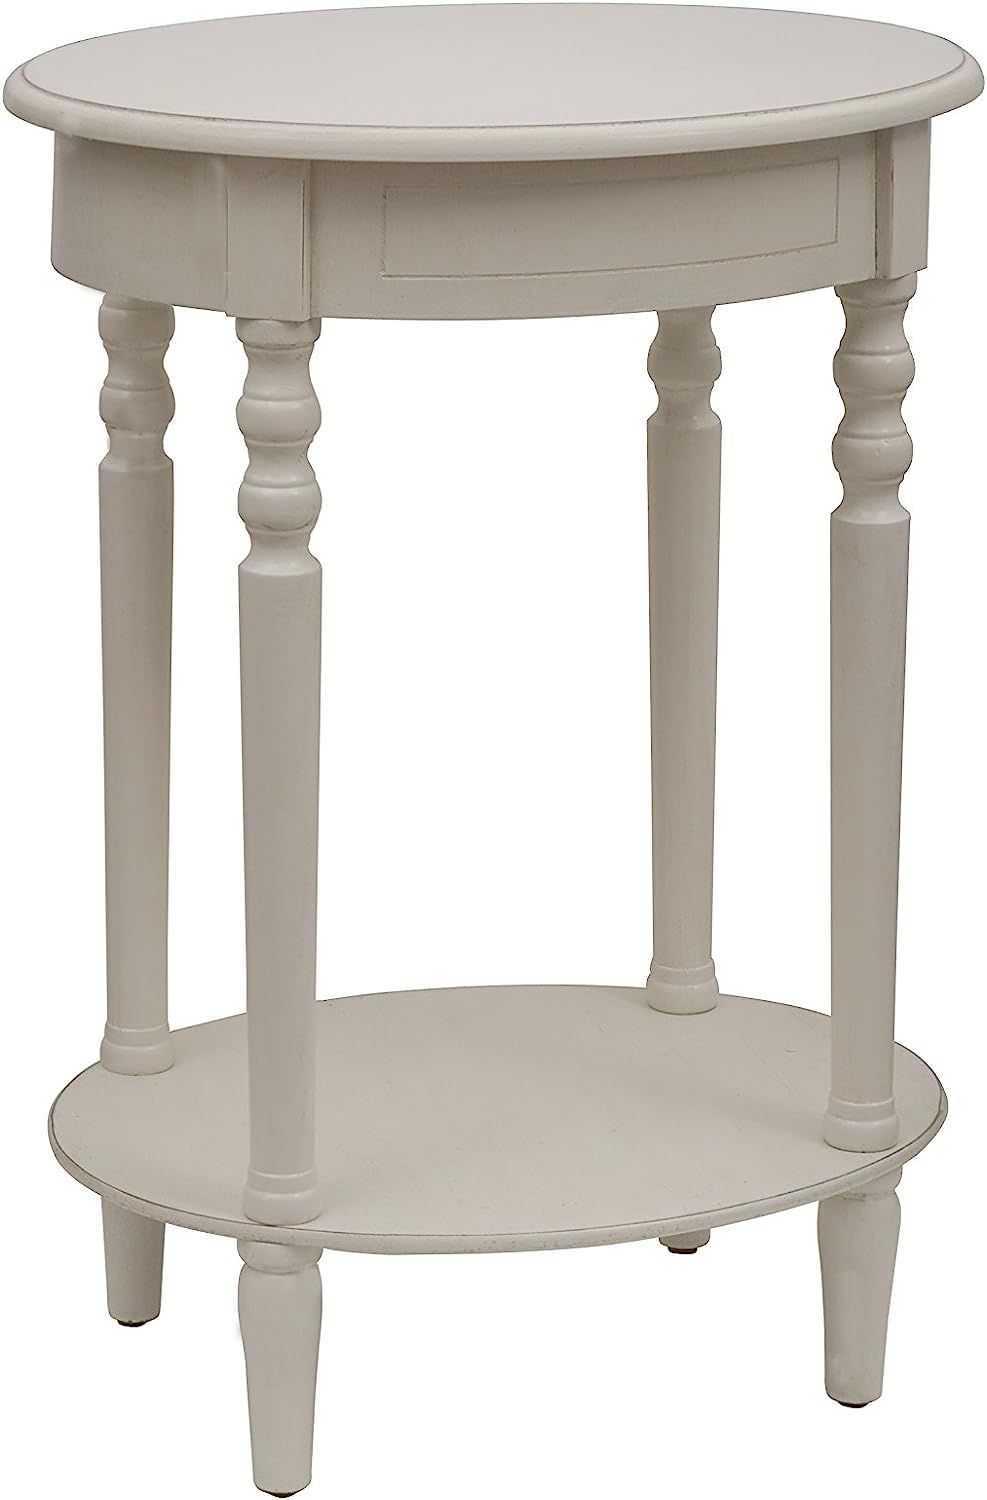 Décor Therapy, Antique White Decor Therapy Simplify Oval Accent Table, (FR1473), 18.31 in x 22.05 in | Amazon (US)